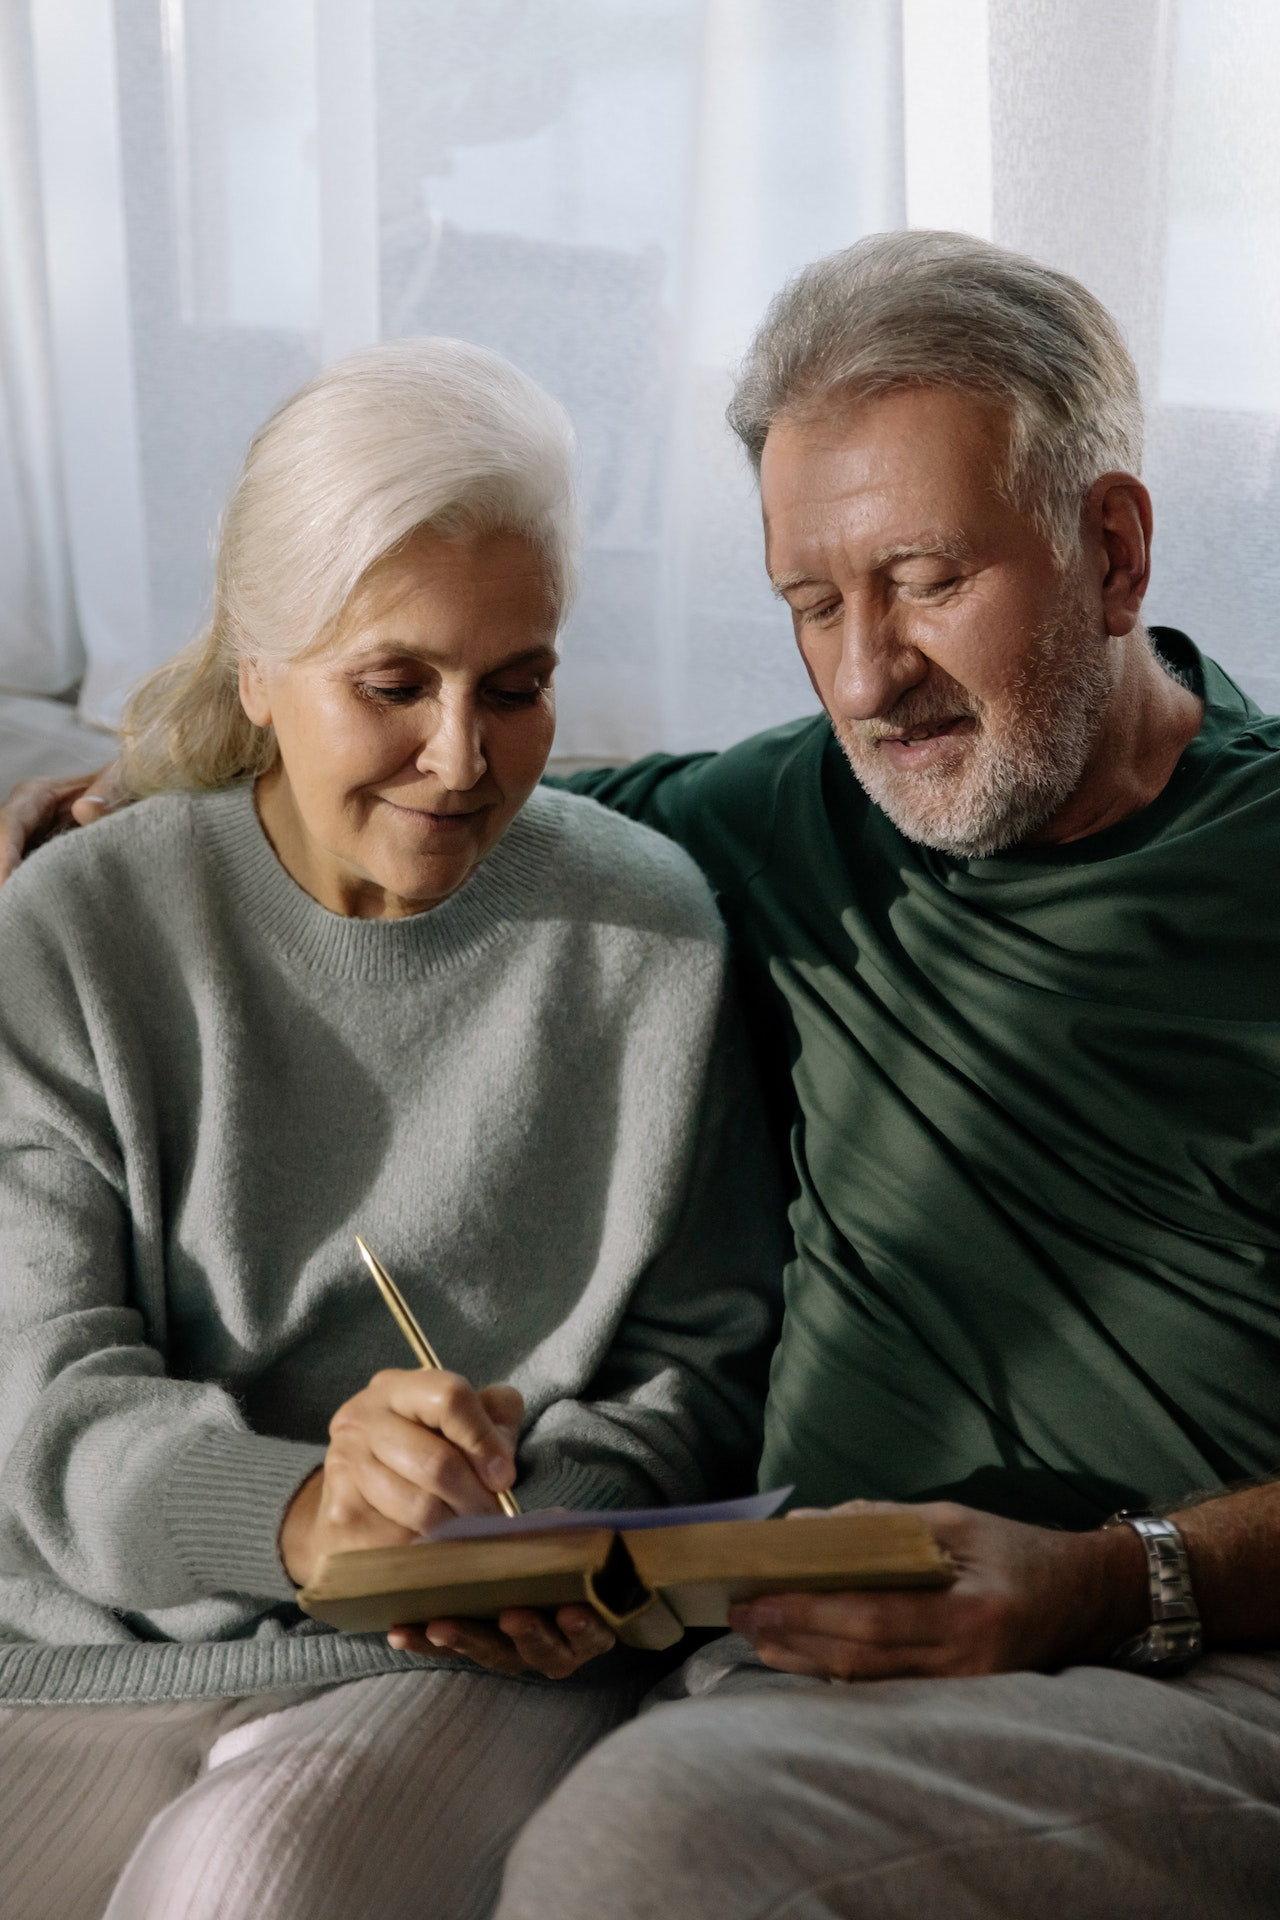 A senior couple discussing their retirement savings and social security benefits